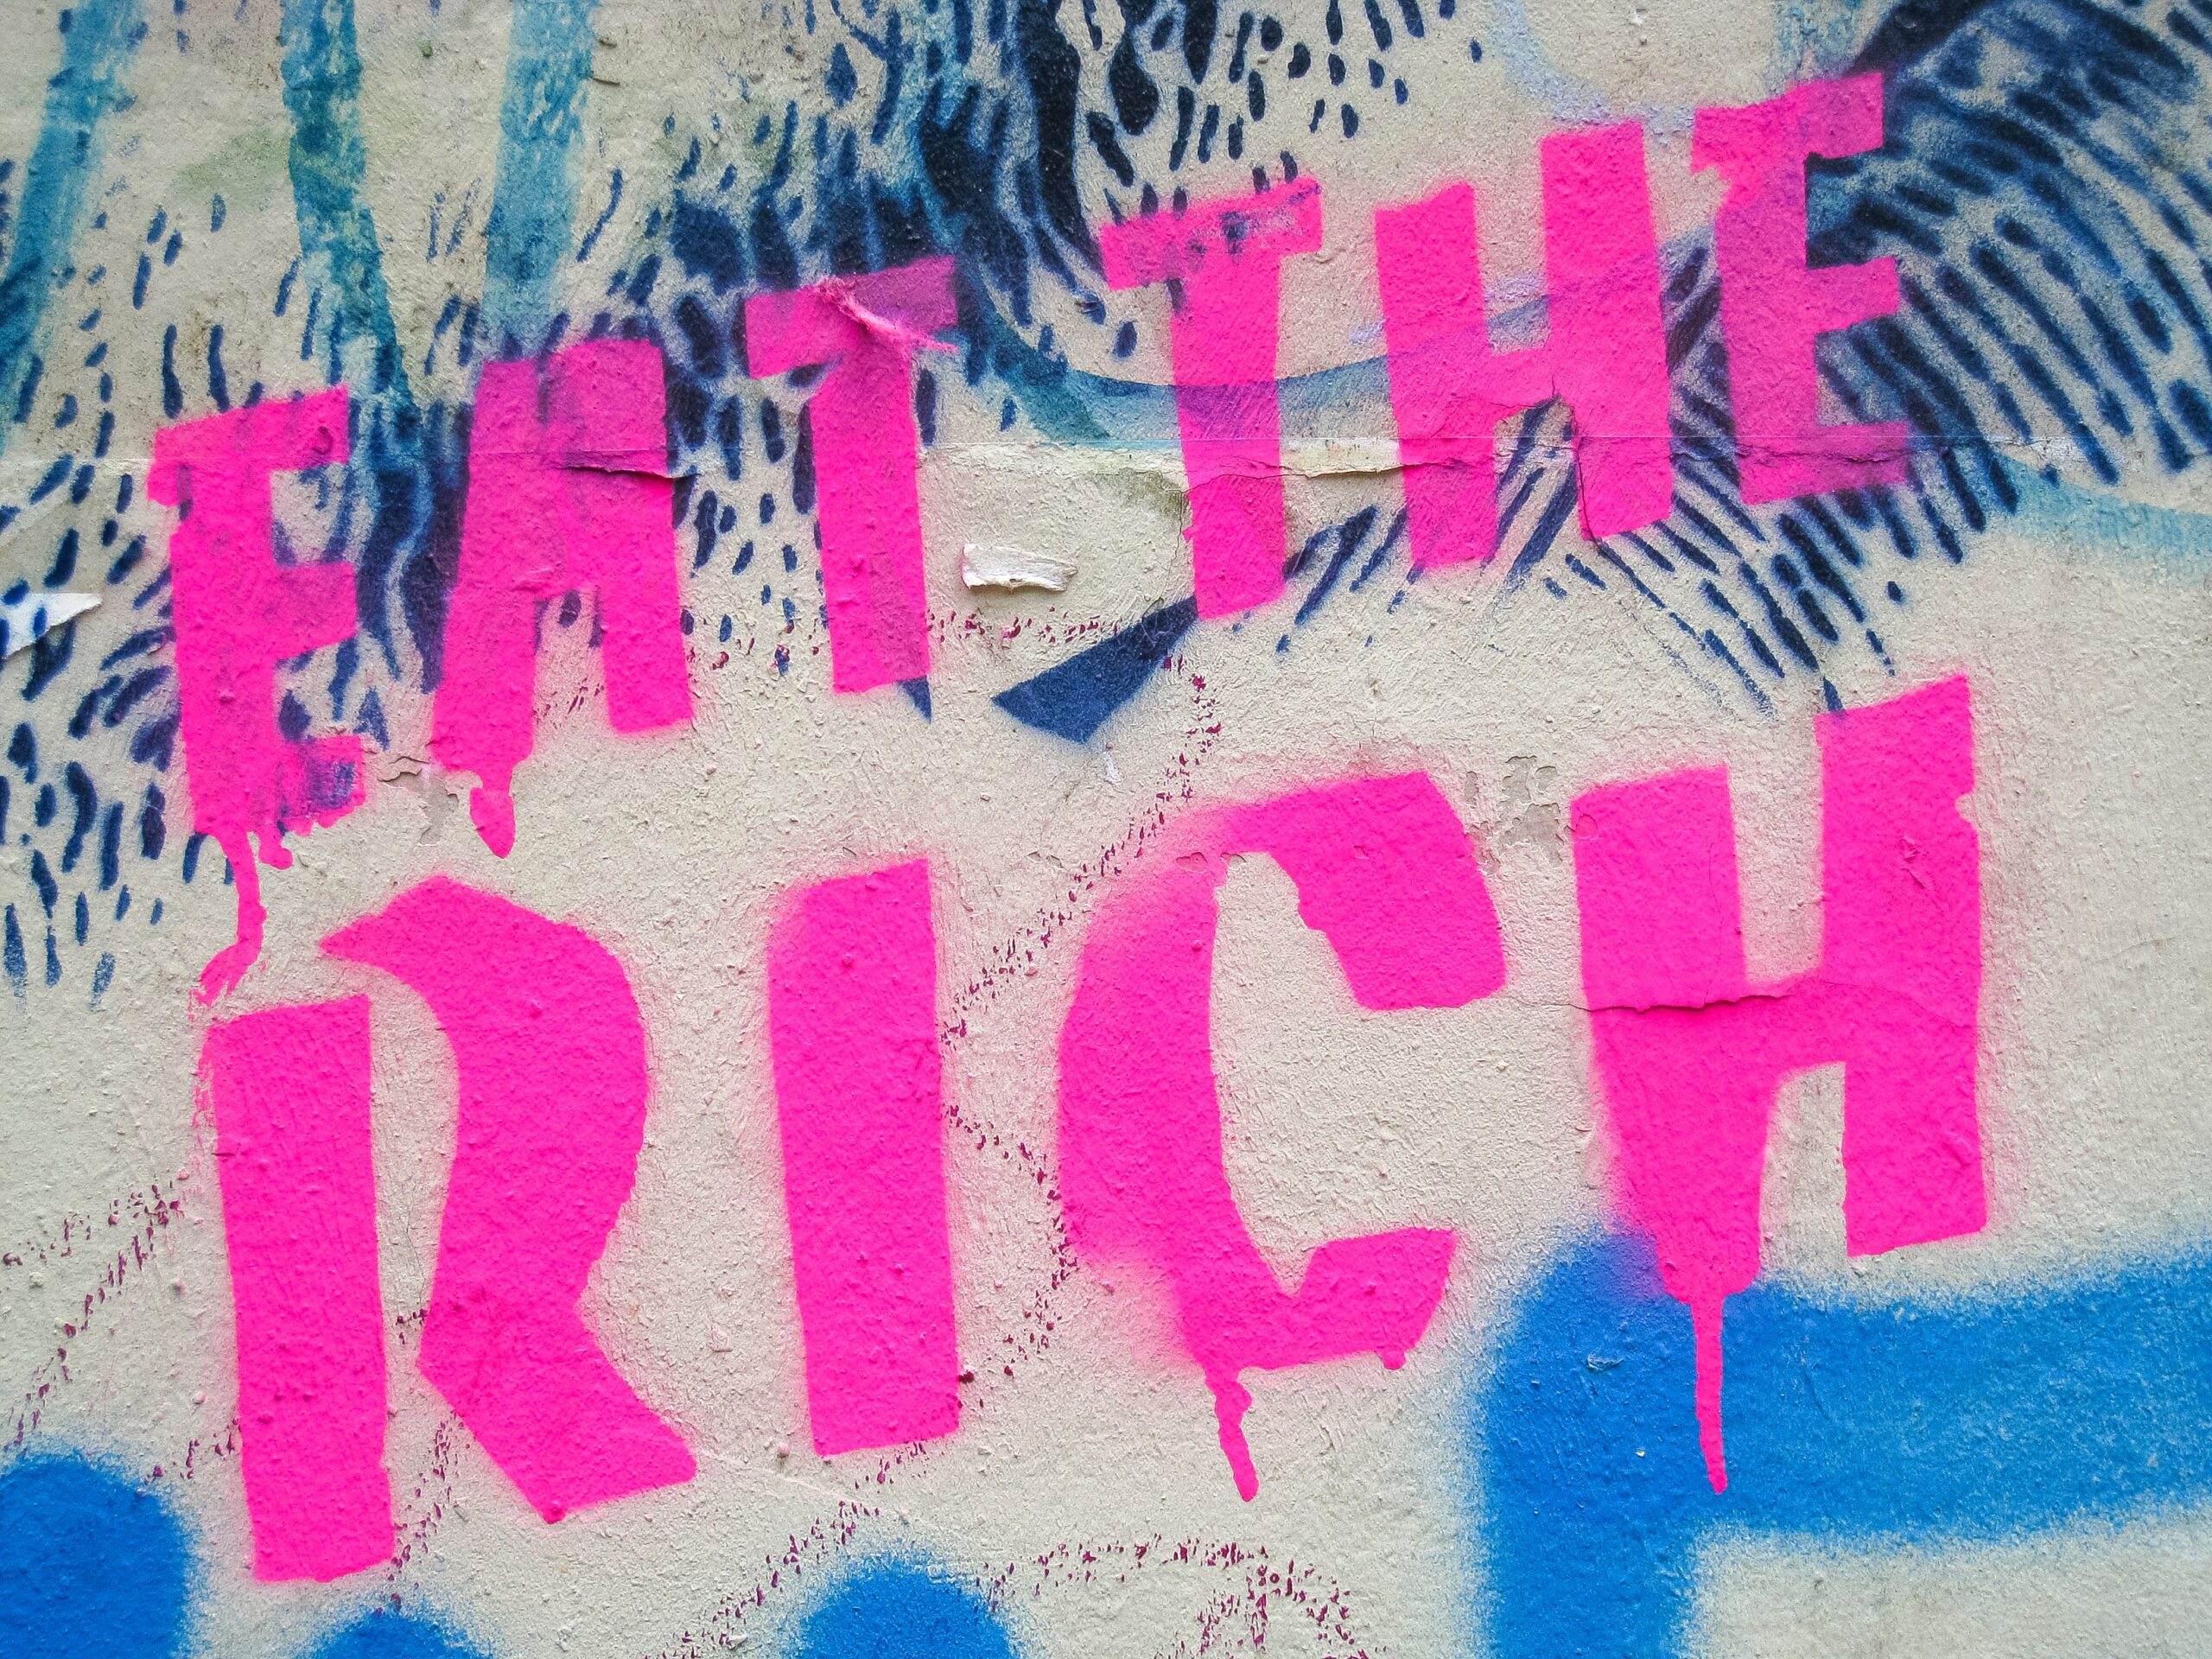 Eat the rich